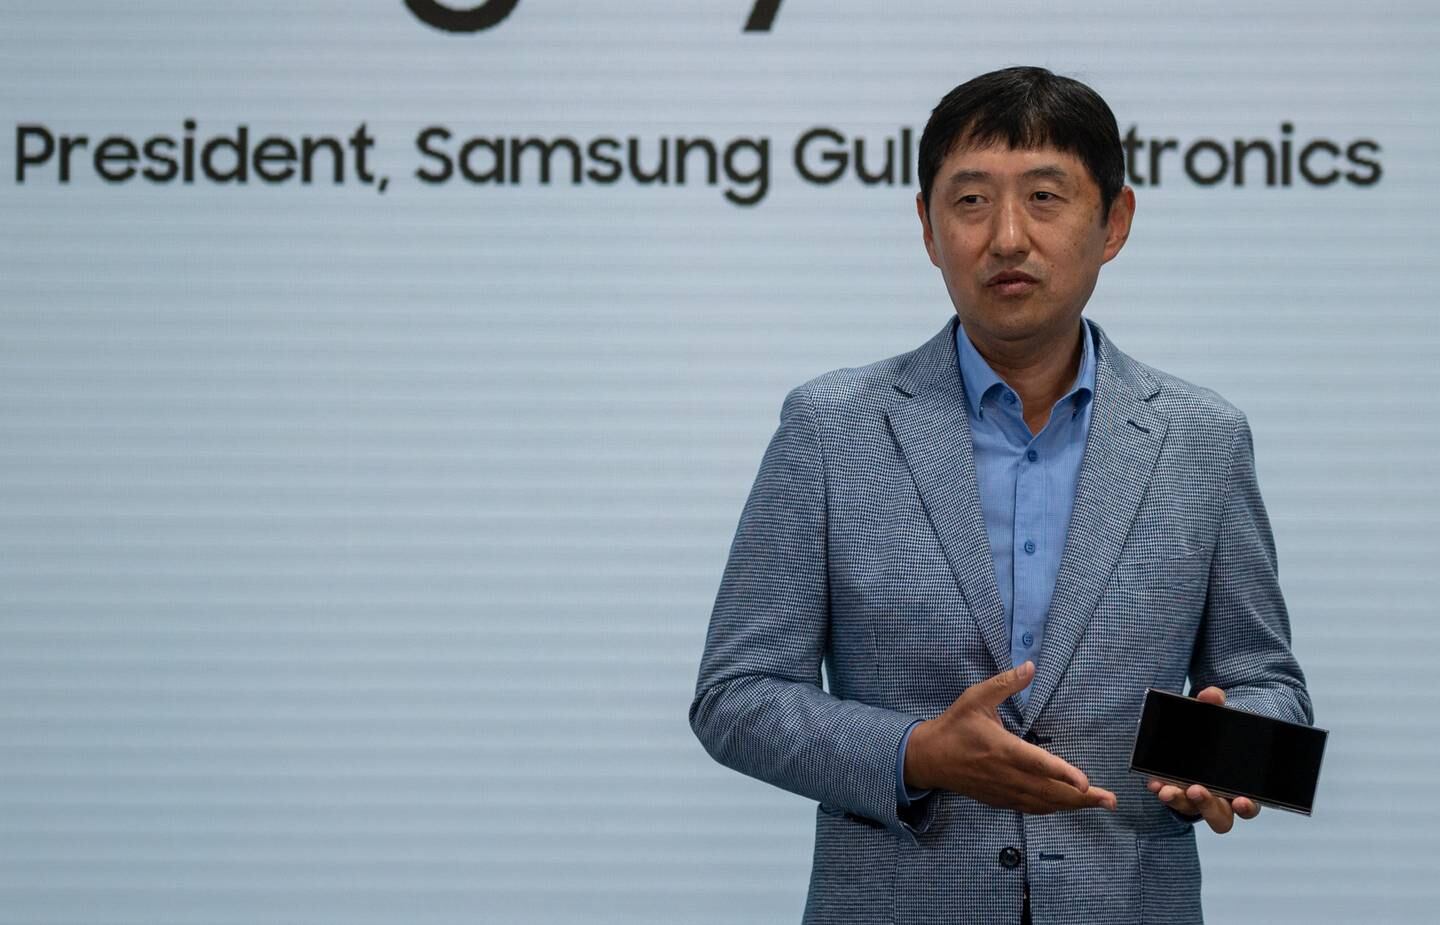 Seong Hyun Lee, president of Samsung Gulf Electronics, delivering a keynote during the UAE launch of the Samsung Galaxy S22 series at the company's offices in Dubai on Wednesday. Ryan Lim / The National